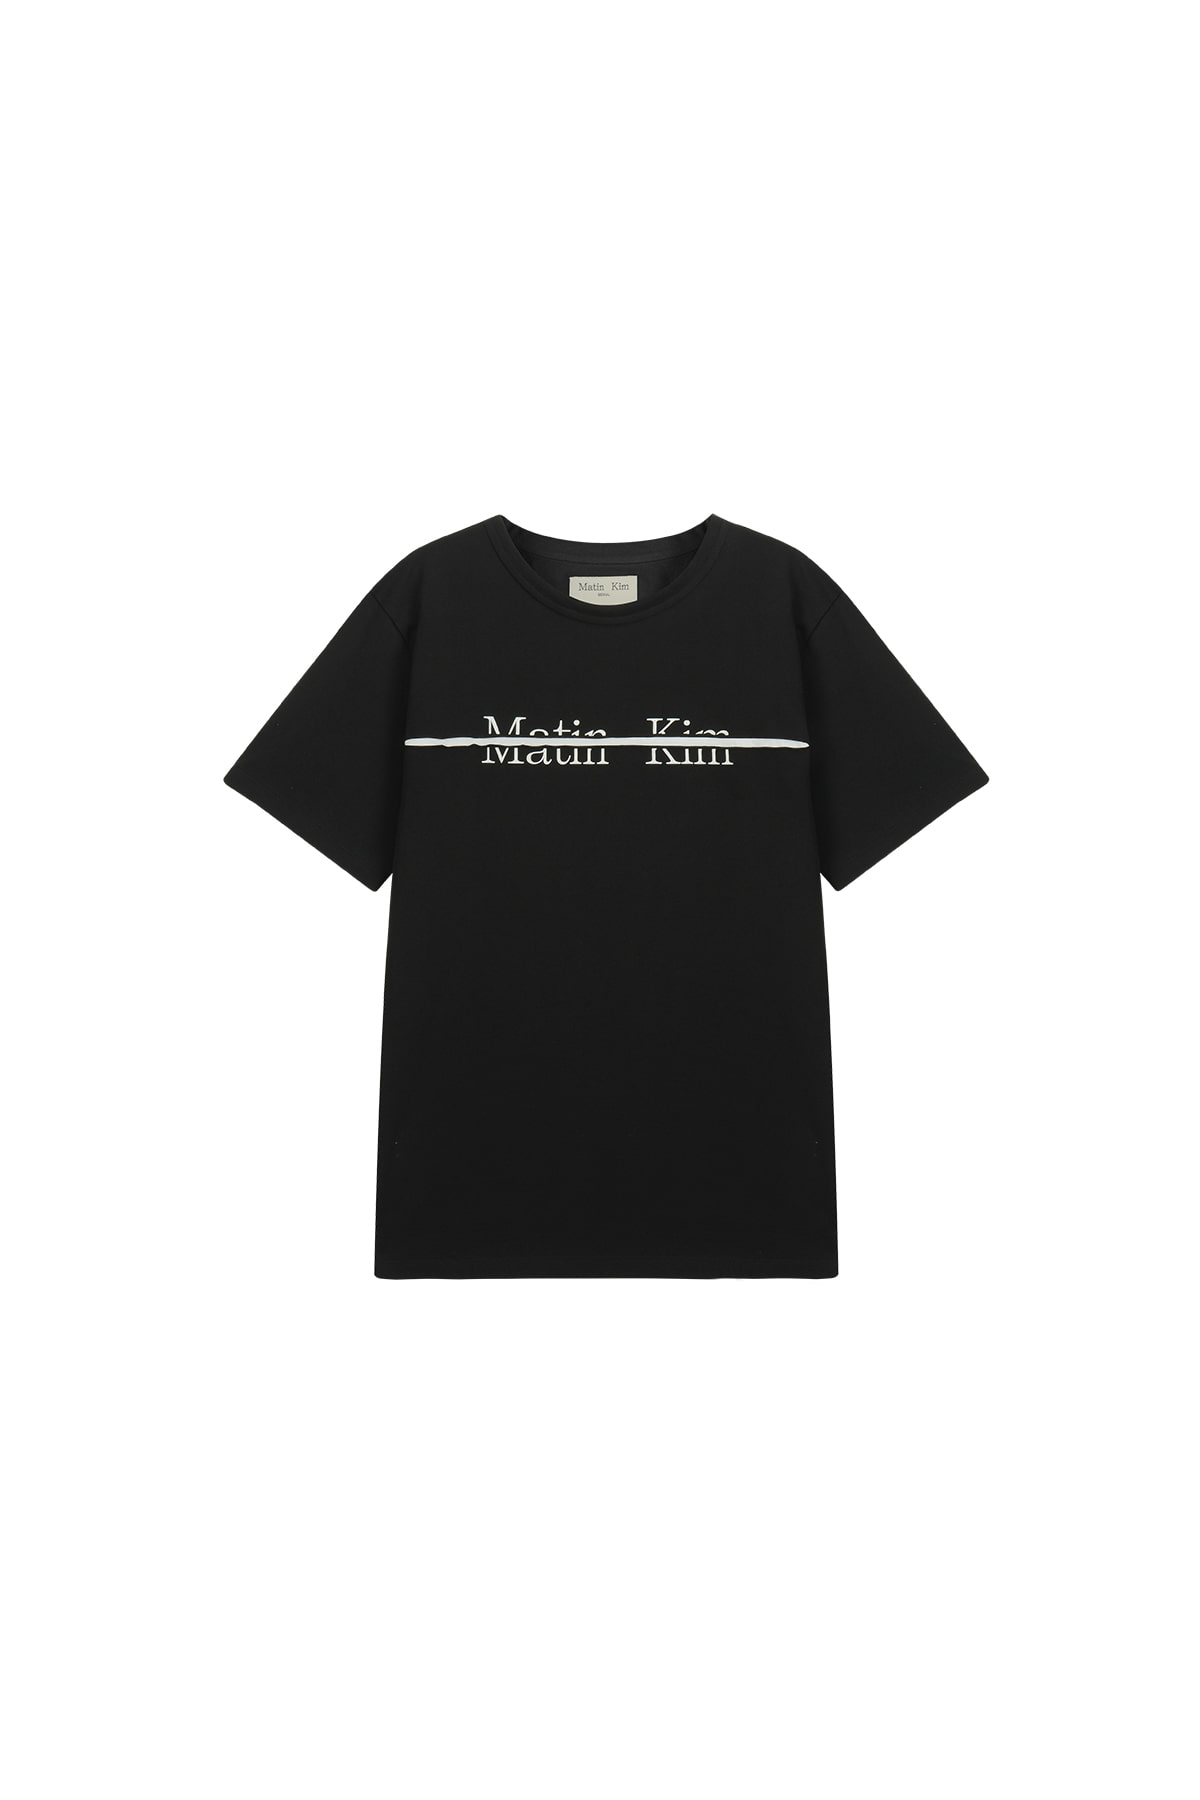 CUTTED LOGO LAYERED TOP IN BLACK - MATINKIM